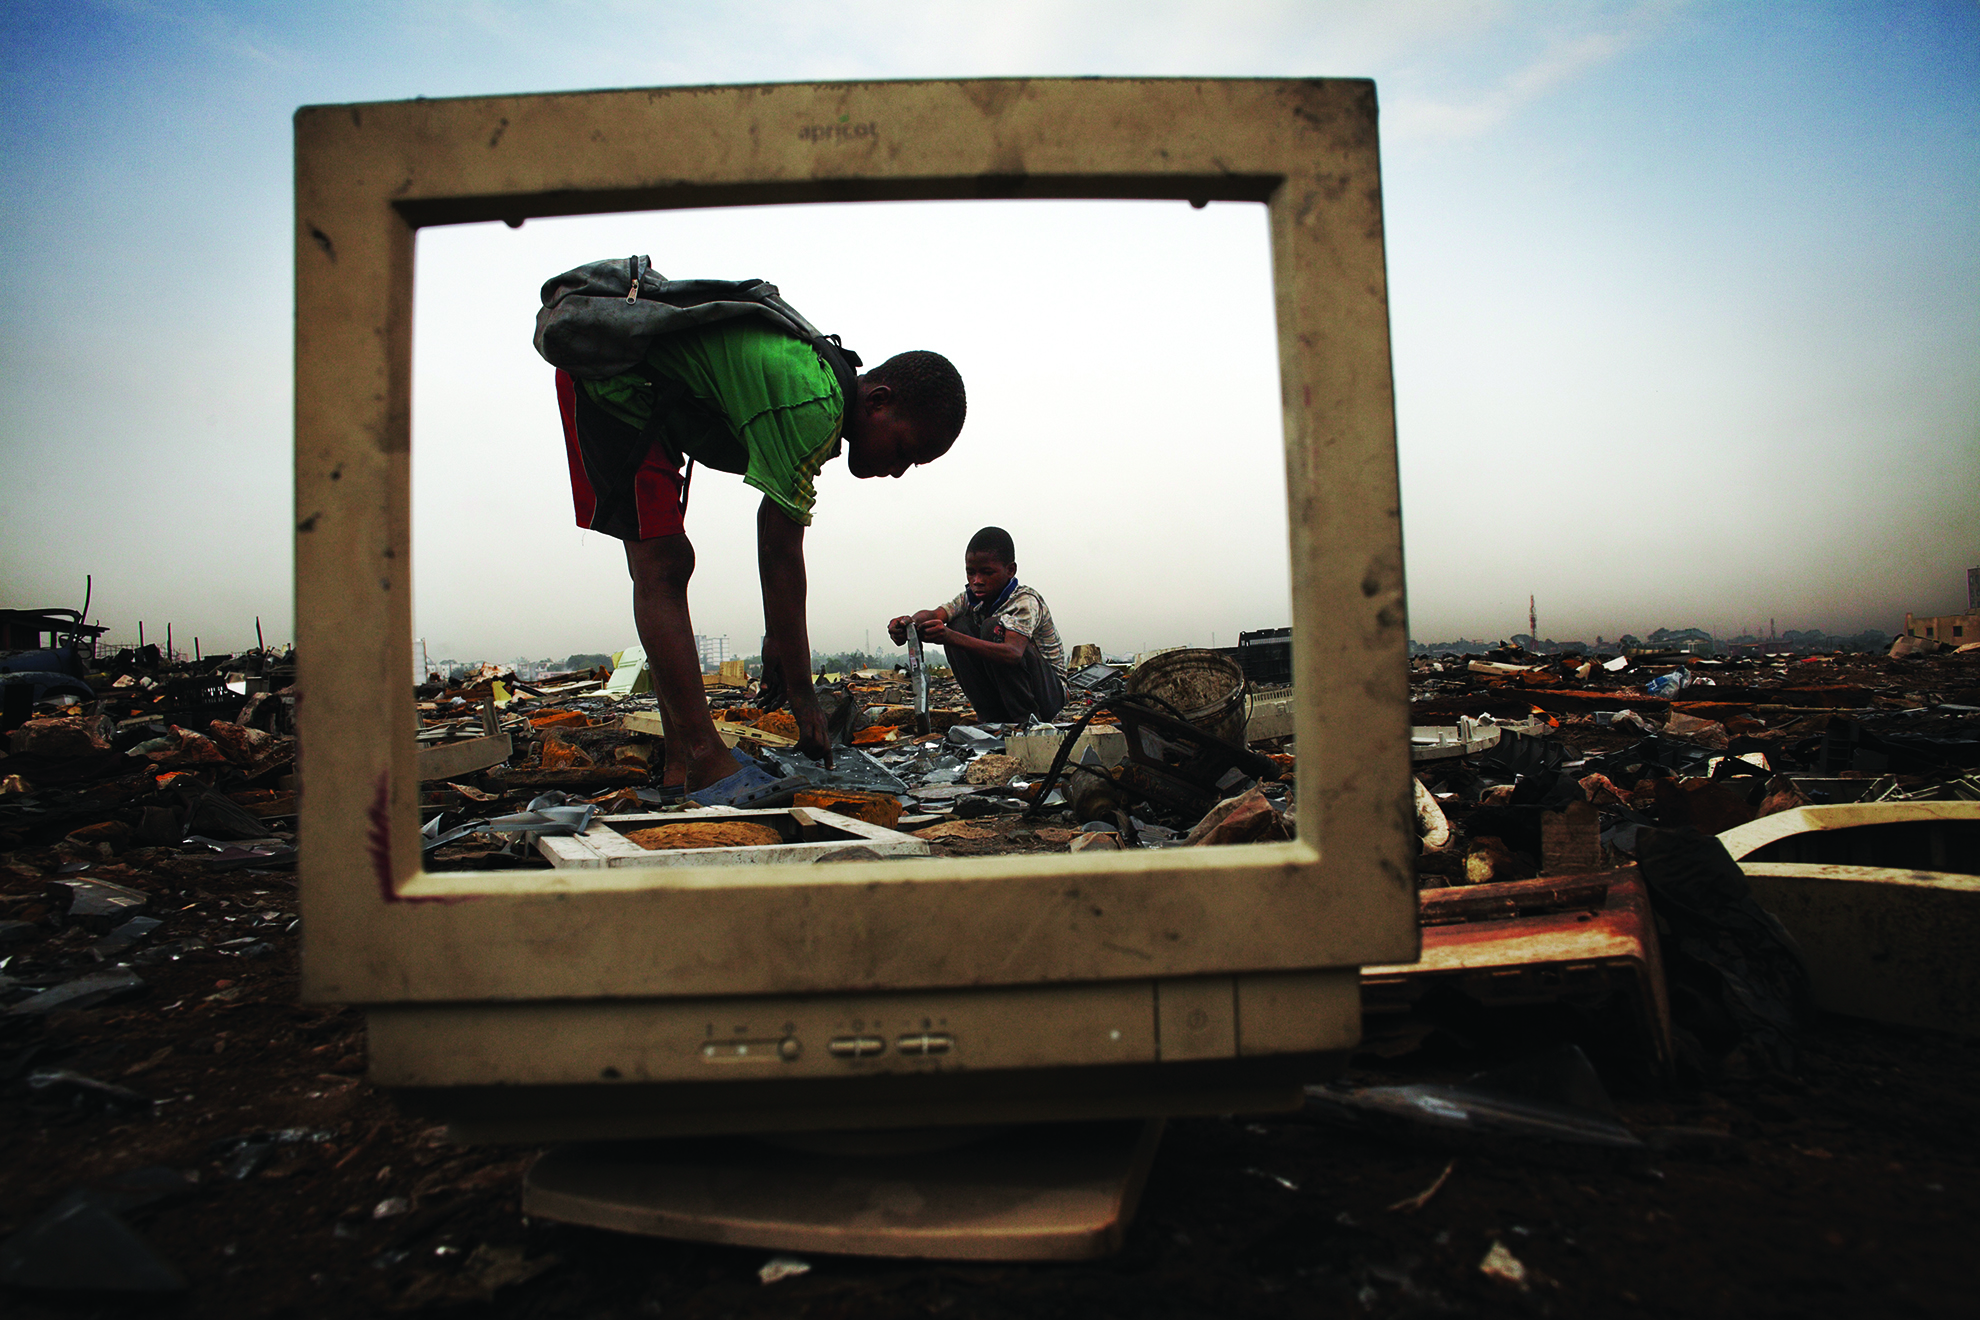 Children break apart CRT monitors to salvage metal from inside, at Agbogbloshie dump. Many children work at the dump salvaging metals which they sell to middlemen. They do not wear any protective clothing and so expose themselves to lethal doses of hazardous chemicals like mercury and lead.